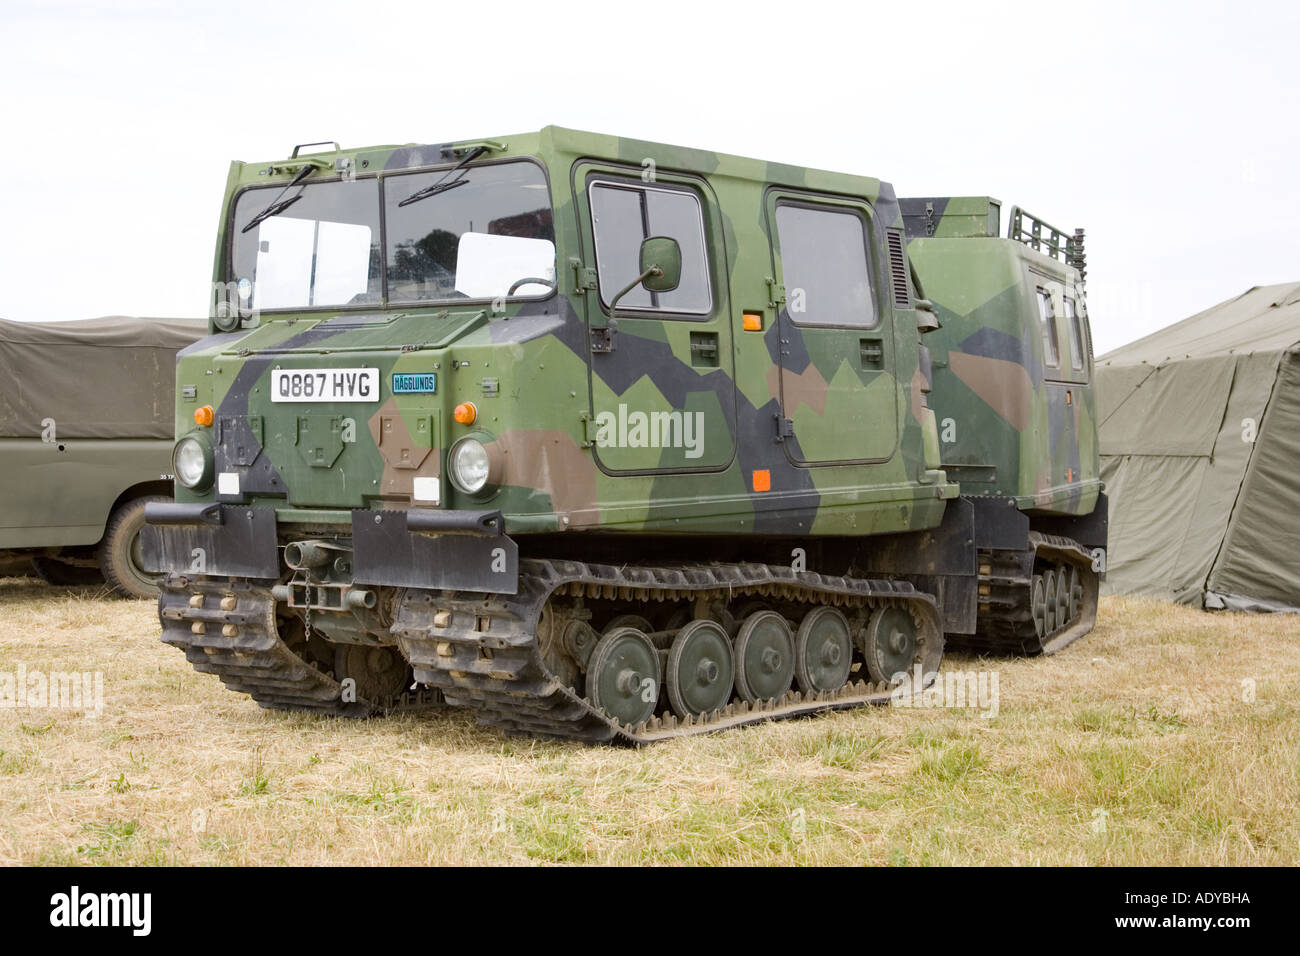 Hagglunds Bv206 tracked all terrain vehicle Stock Photo